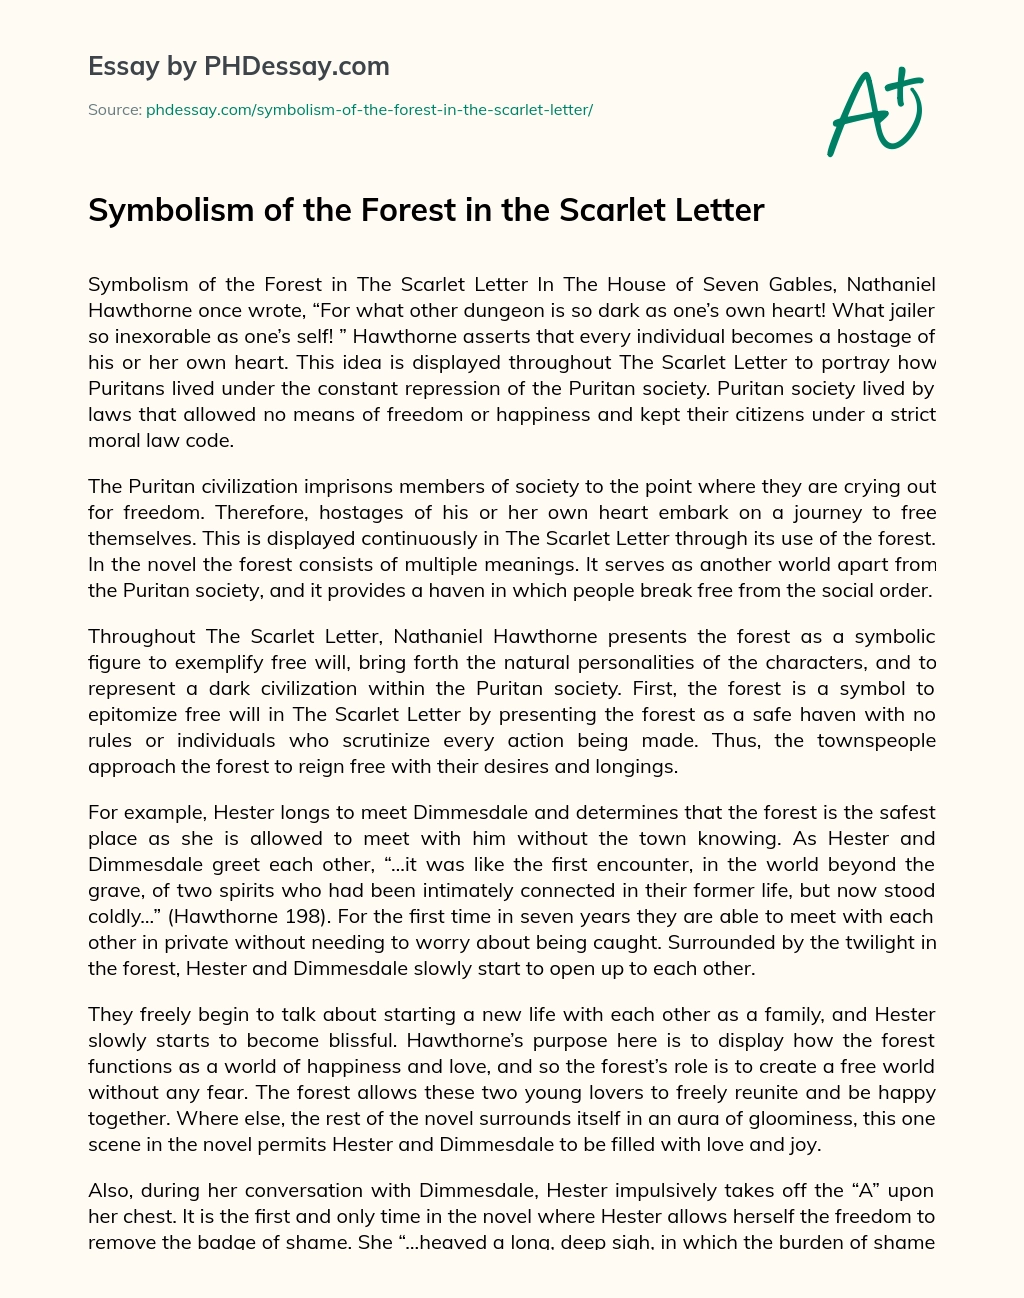 Symbolism of the Forest in the Scarlet Letter essay